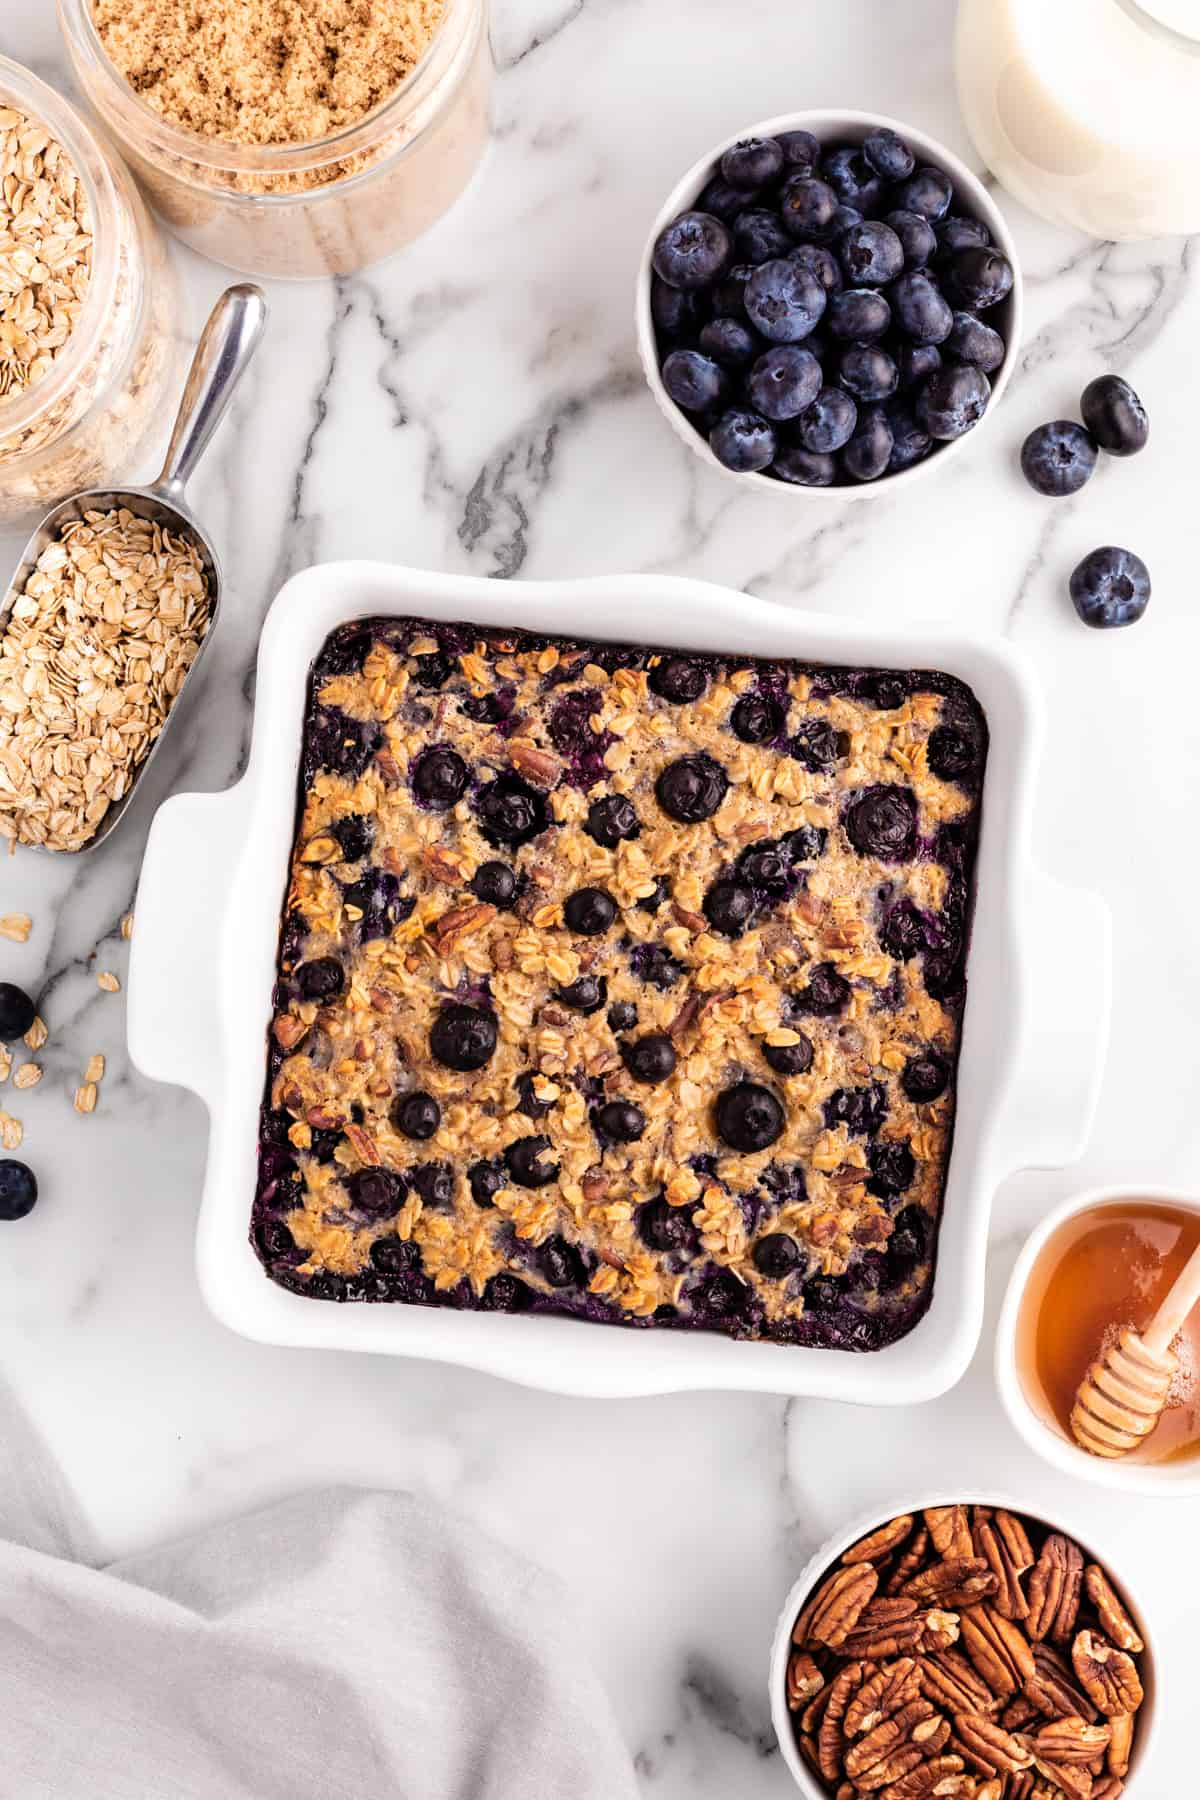 Blueberry Baked Oatmeal Recipe The Cookie Rookie®